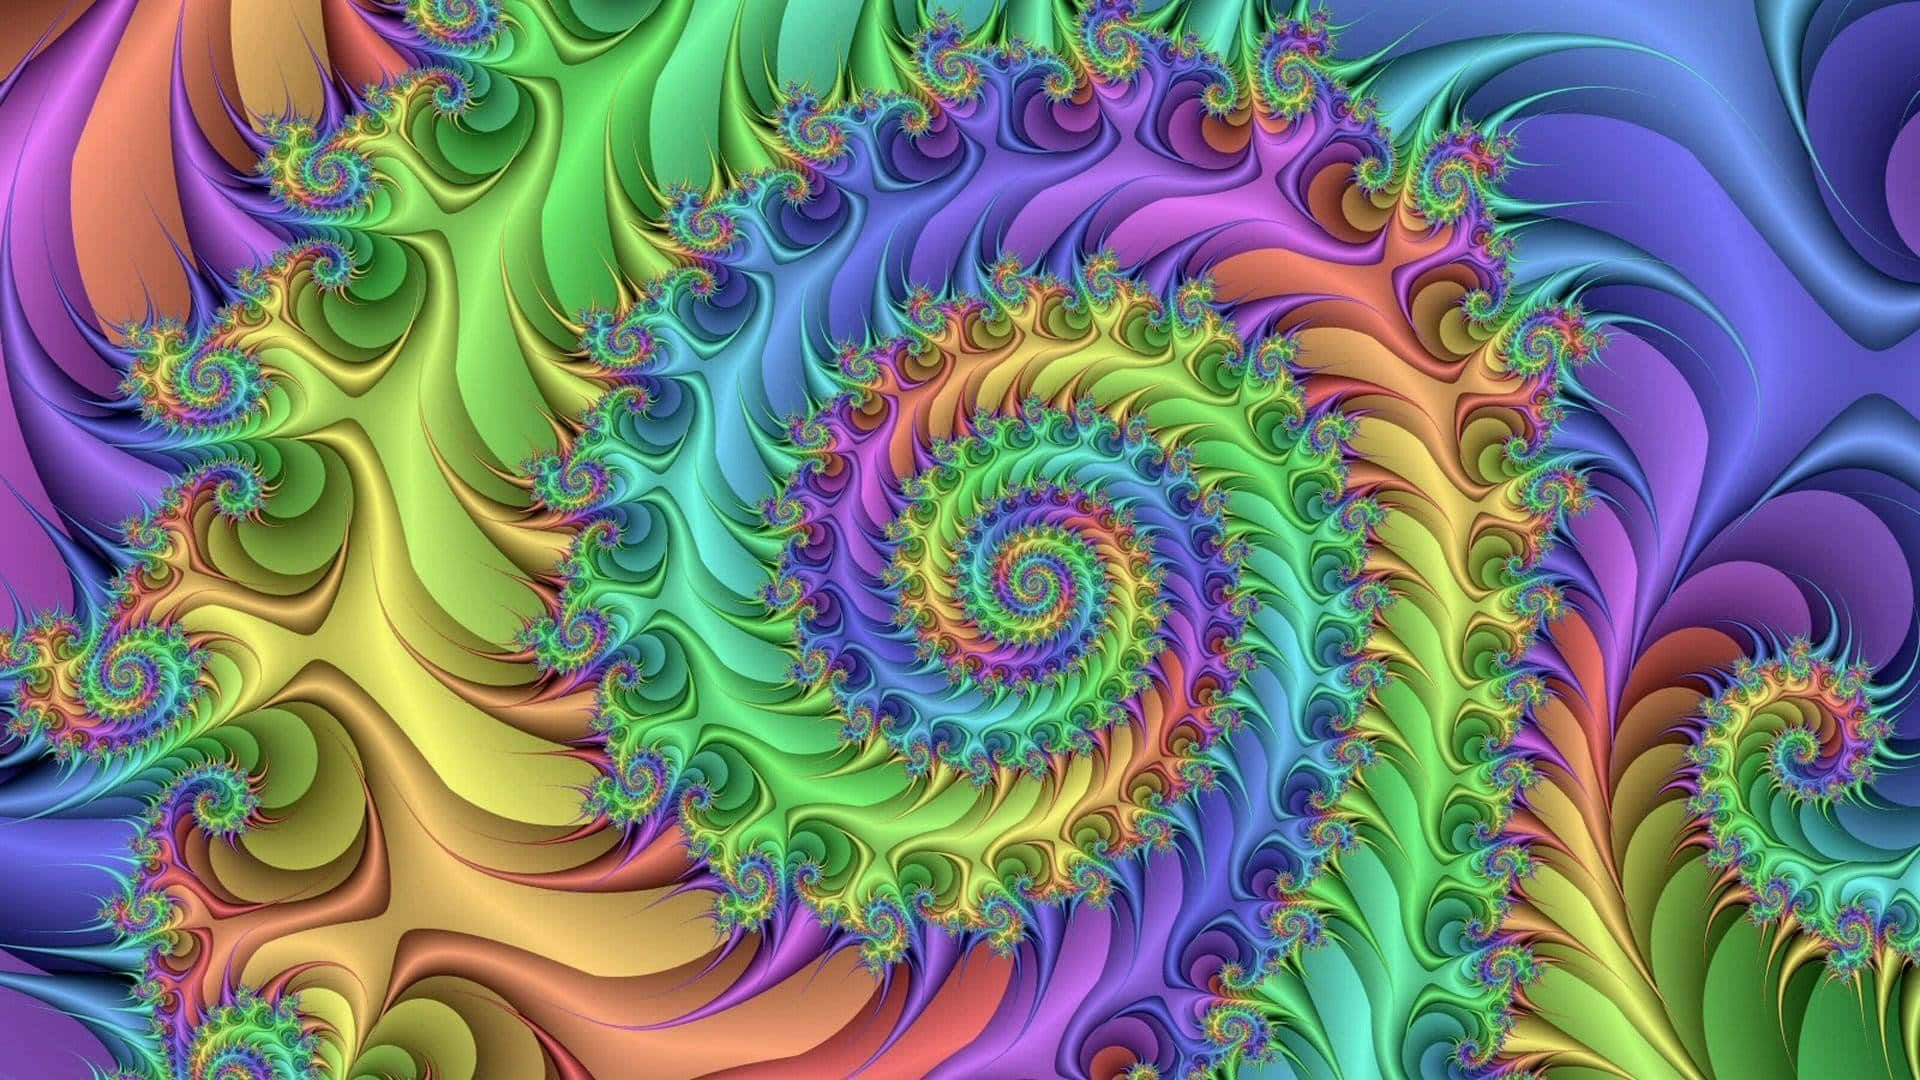 Enter a beautiful world of colors, shapes, and emotion with this trippy wallpaper